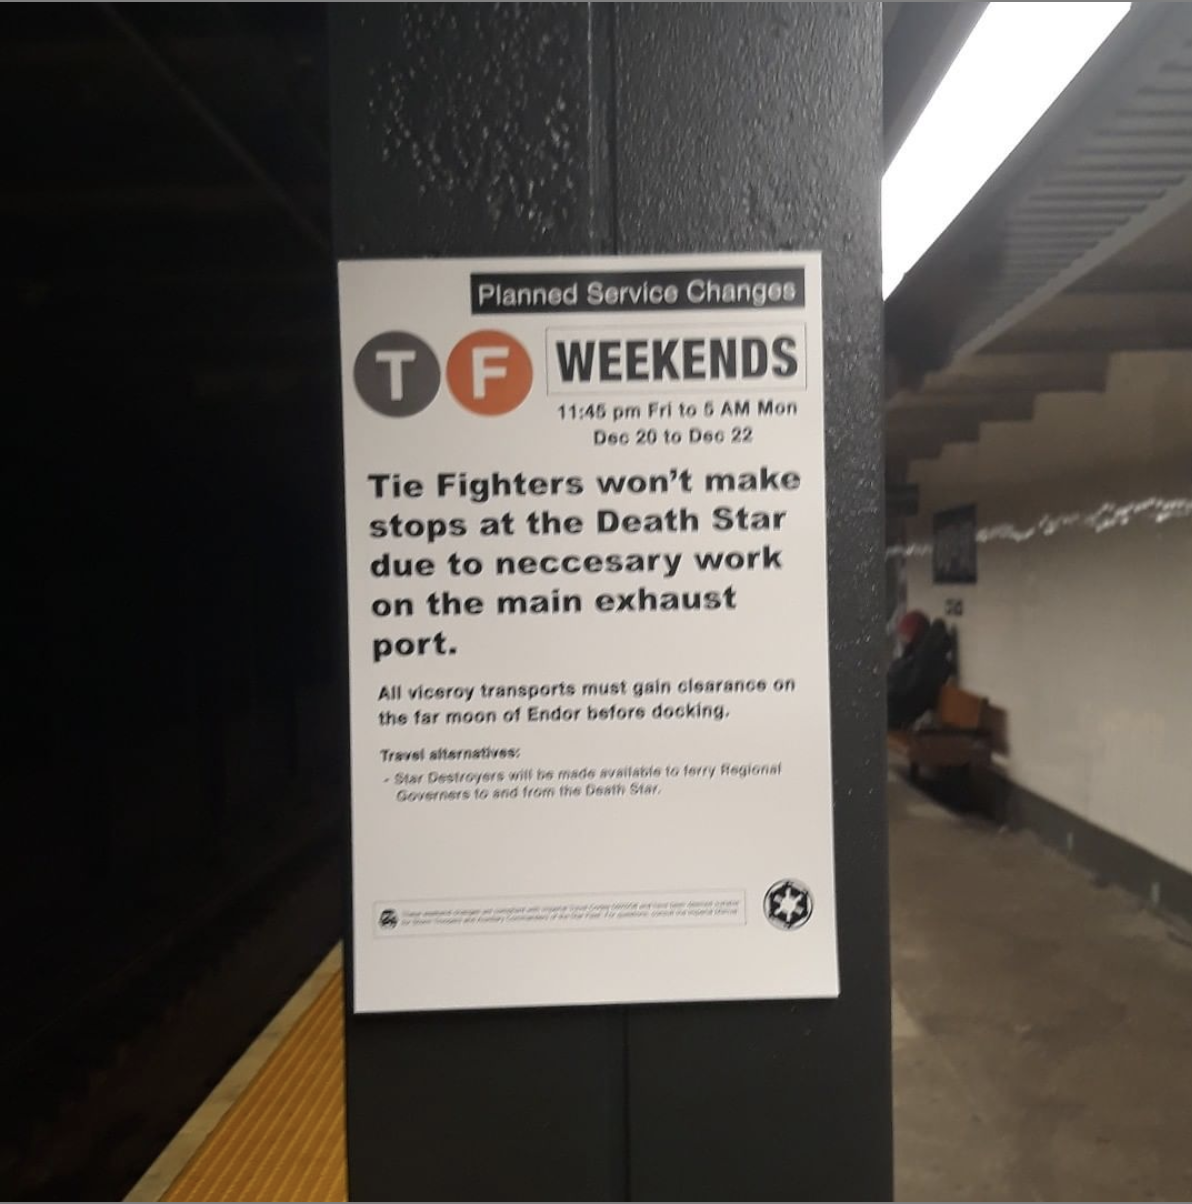 poster inside of an MTA subway station relating service changes to the Star Wars films